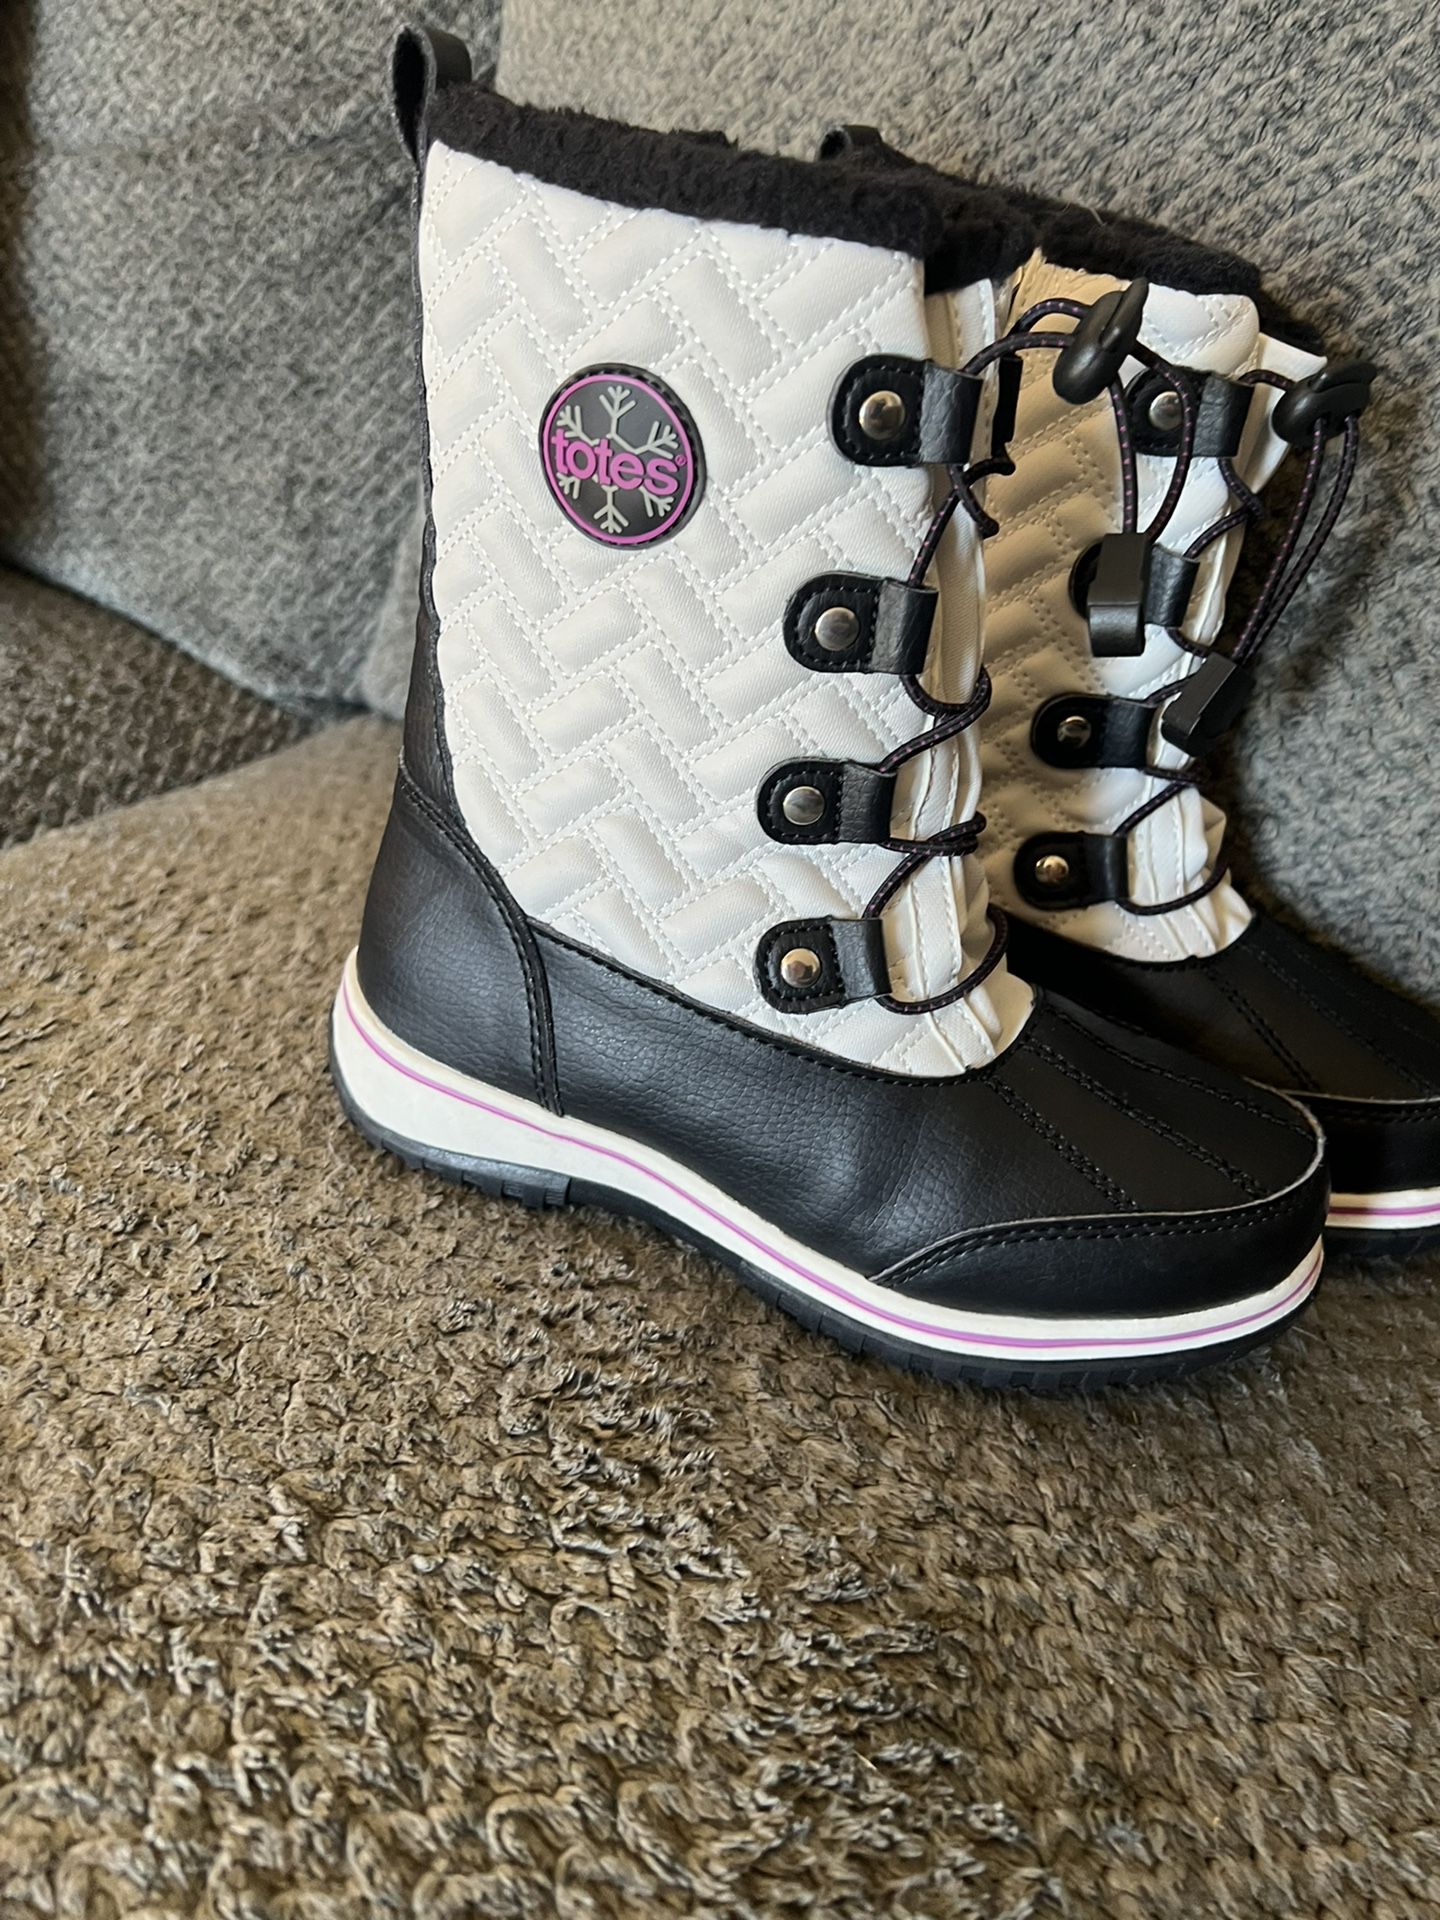 Totes Brand Girls Snow Boots